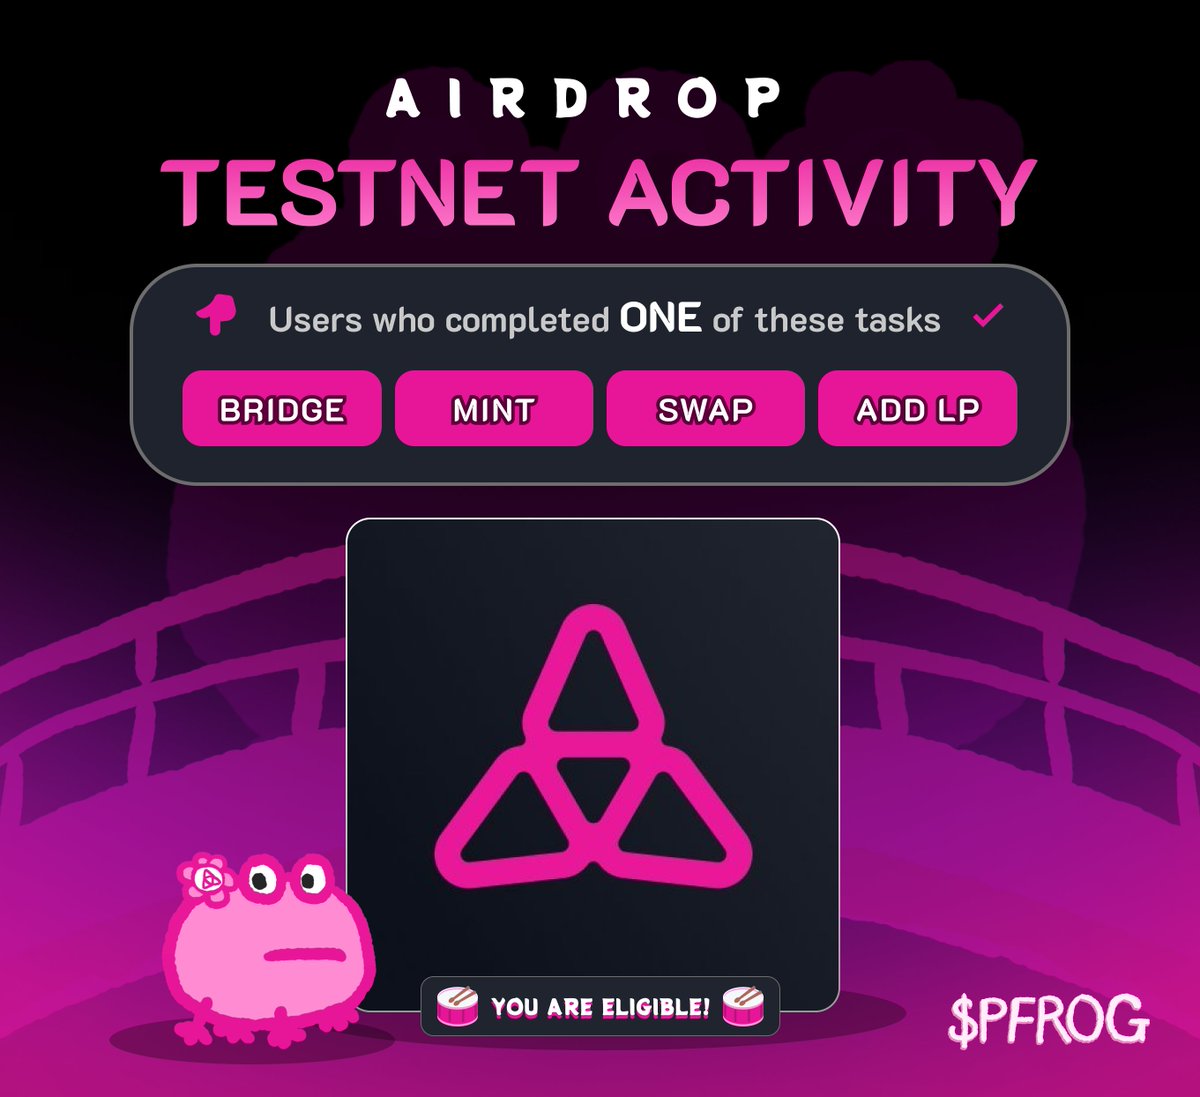 AIRDROP, BUDDY! @taikoxyz if you joined the testnet, you pink! •⁠ ⁠LIKE, RT •⁠ ⁠FILL THIS forms.gle/XYsXRiLjzDQHP9… 10% OF TOTAL SUPPLY WILL BE AIRDROPPED TO THE COMMUNITY!